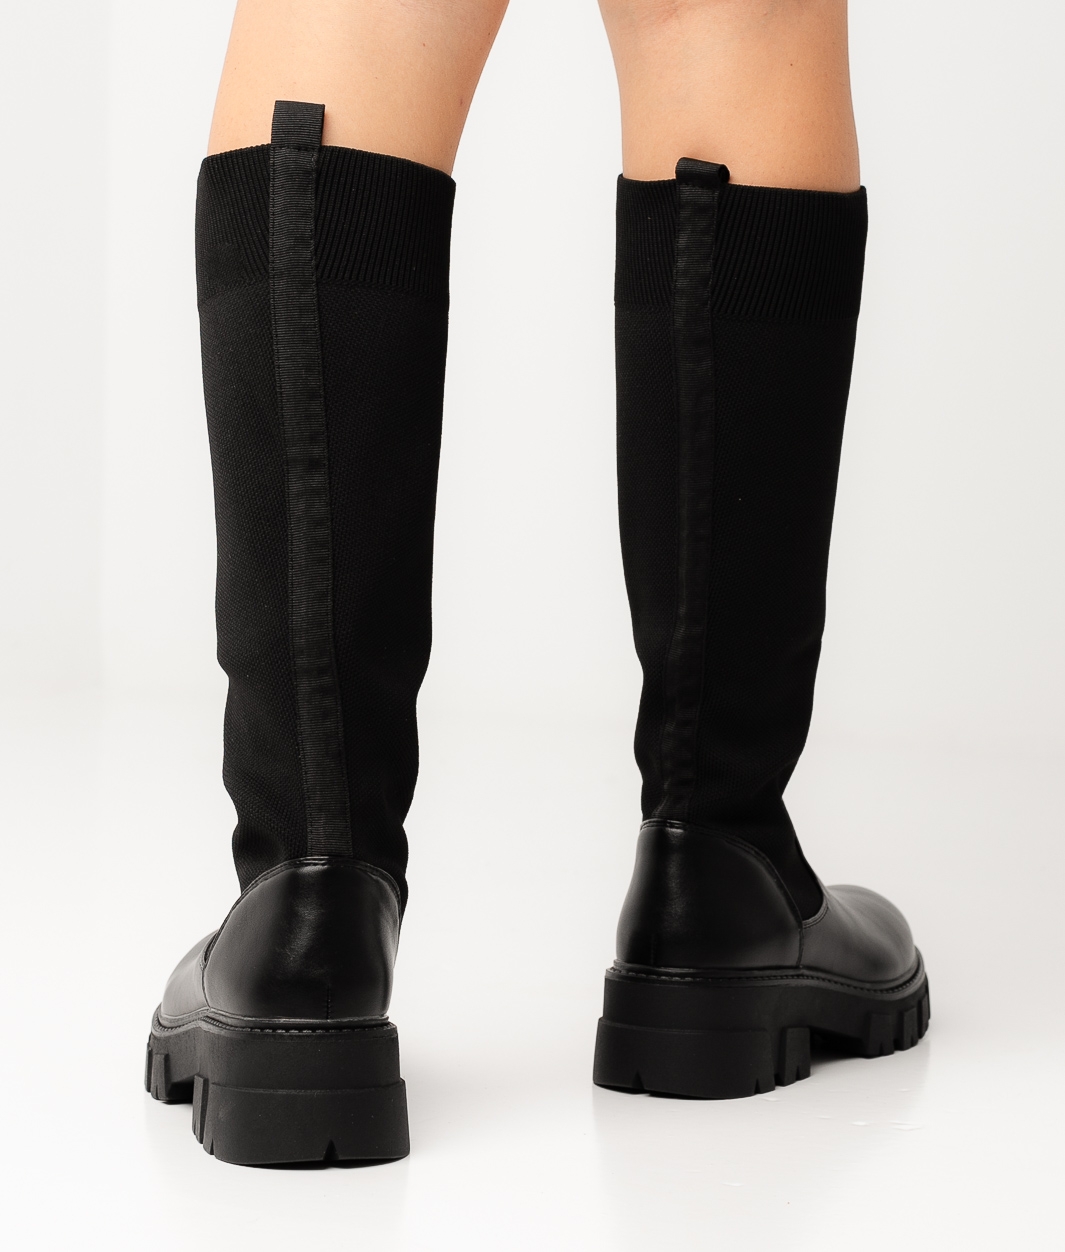 FIRAL KNEE-LENGHT BOOT - BLACK